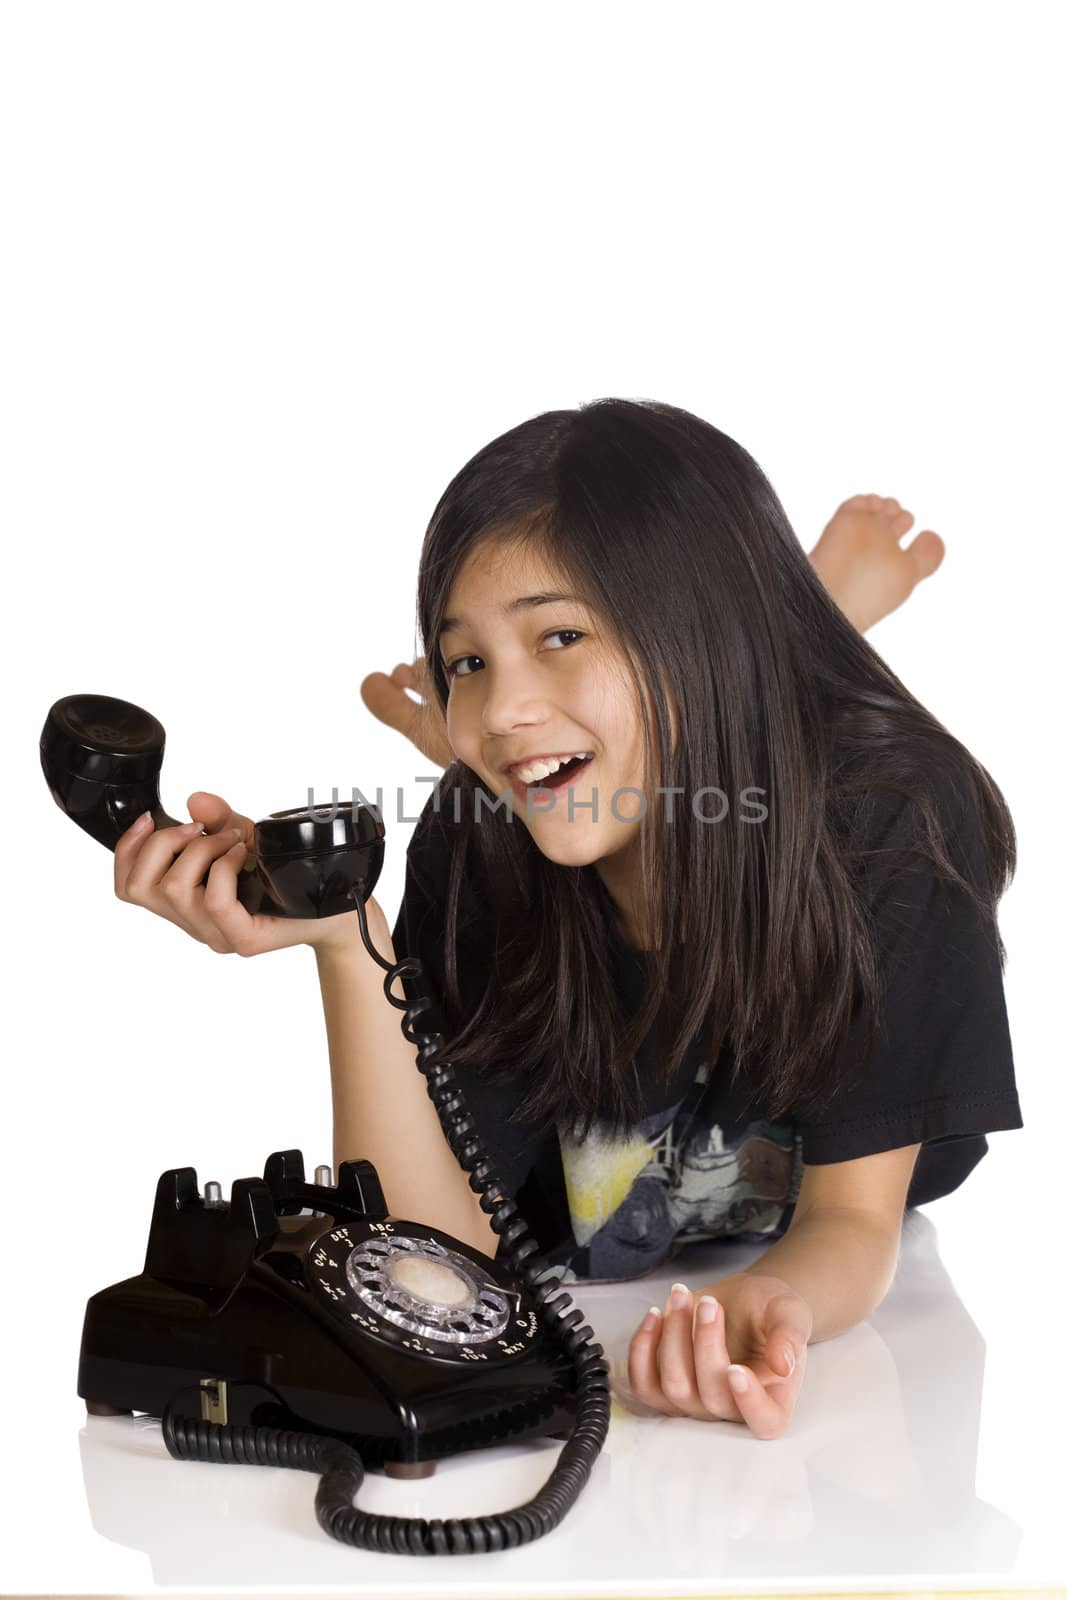 Girl holding old rotary phone